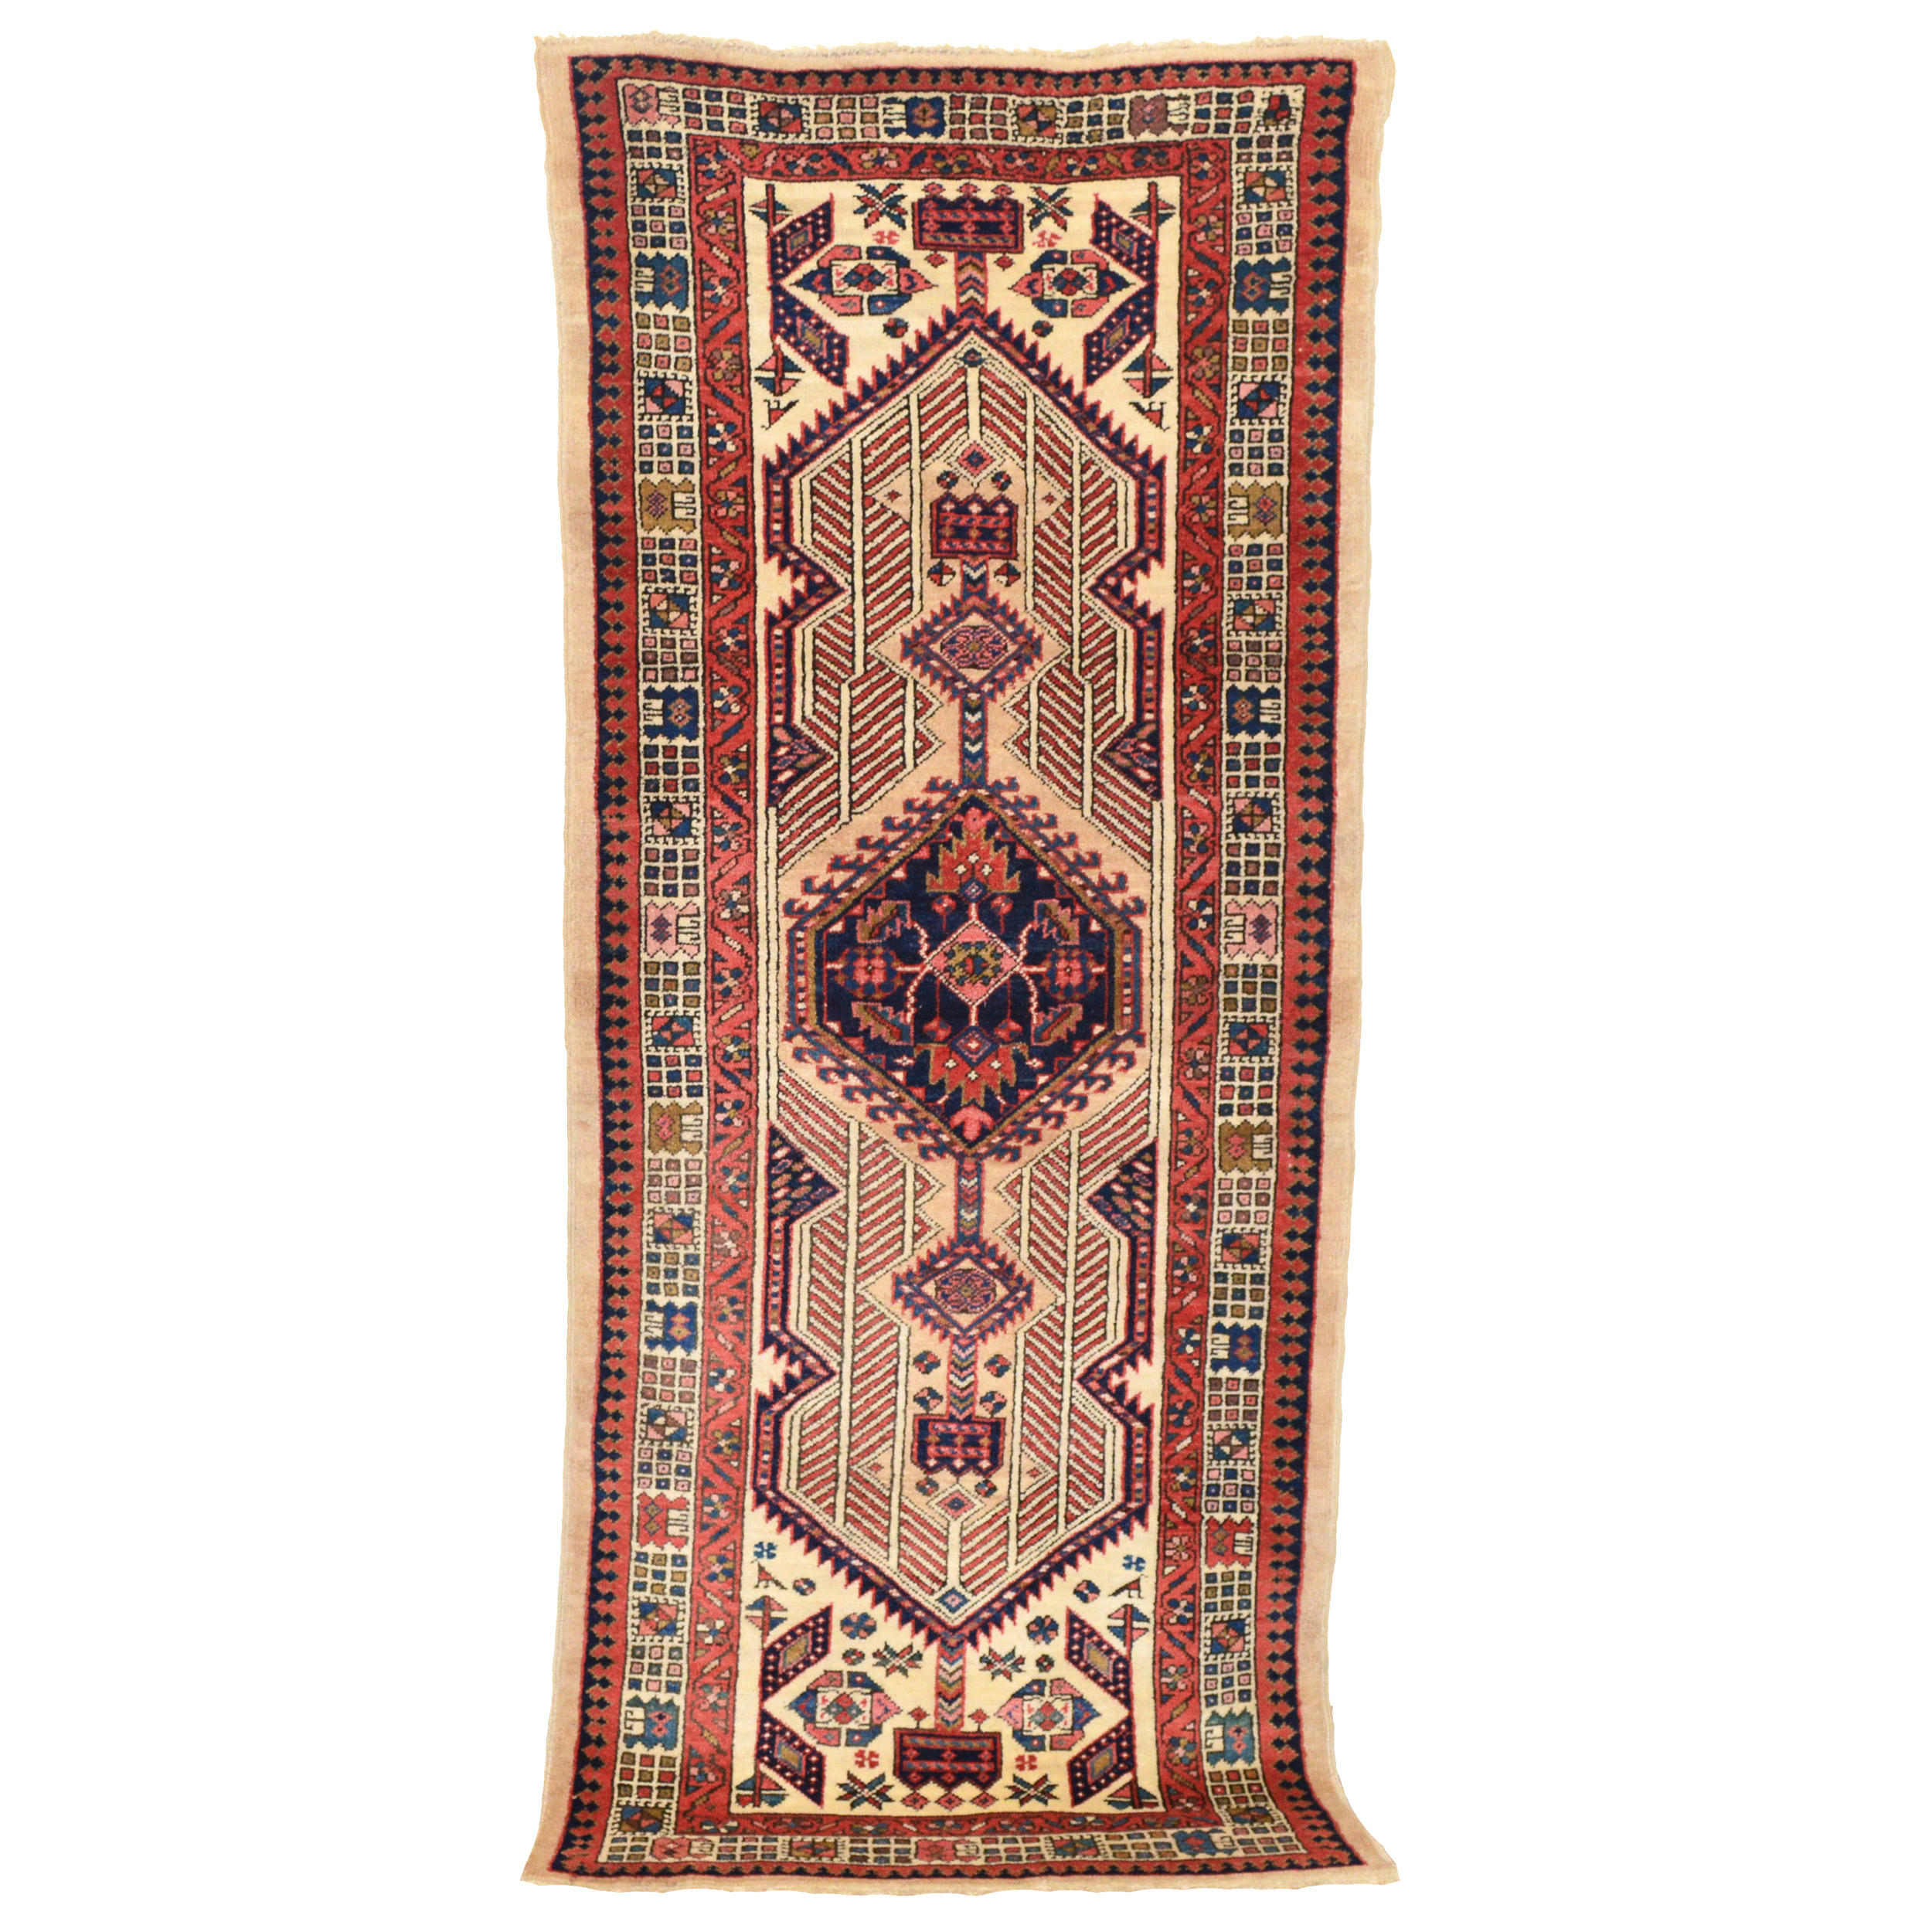 AnAntique Persian Serab long rug (wide and short runner) with a navy medallion on a camel color field that is framed by an ivory border with geometric motifs, circa 1930. Douglas Stock Gallery, antique Oriental rugs Boston,MA area South Natick